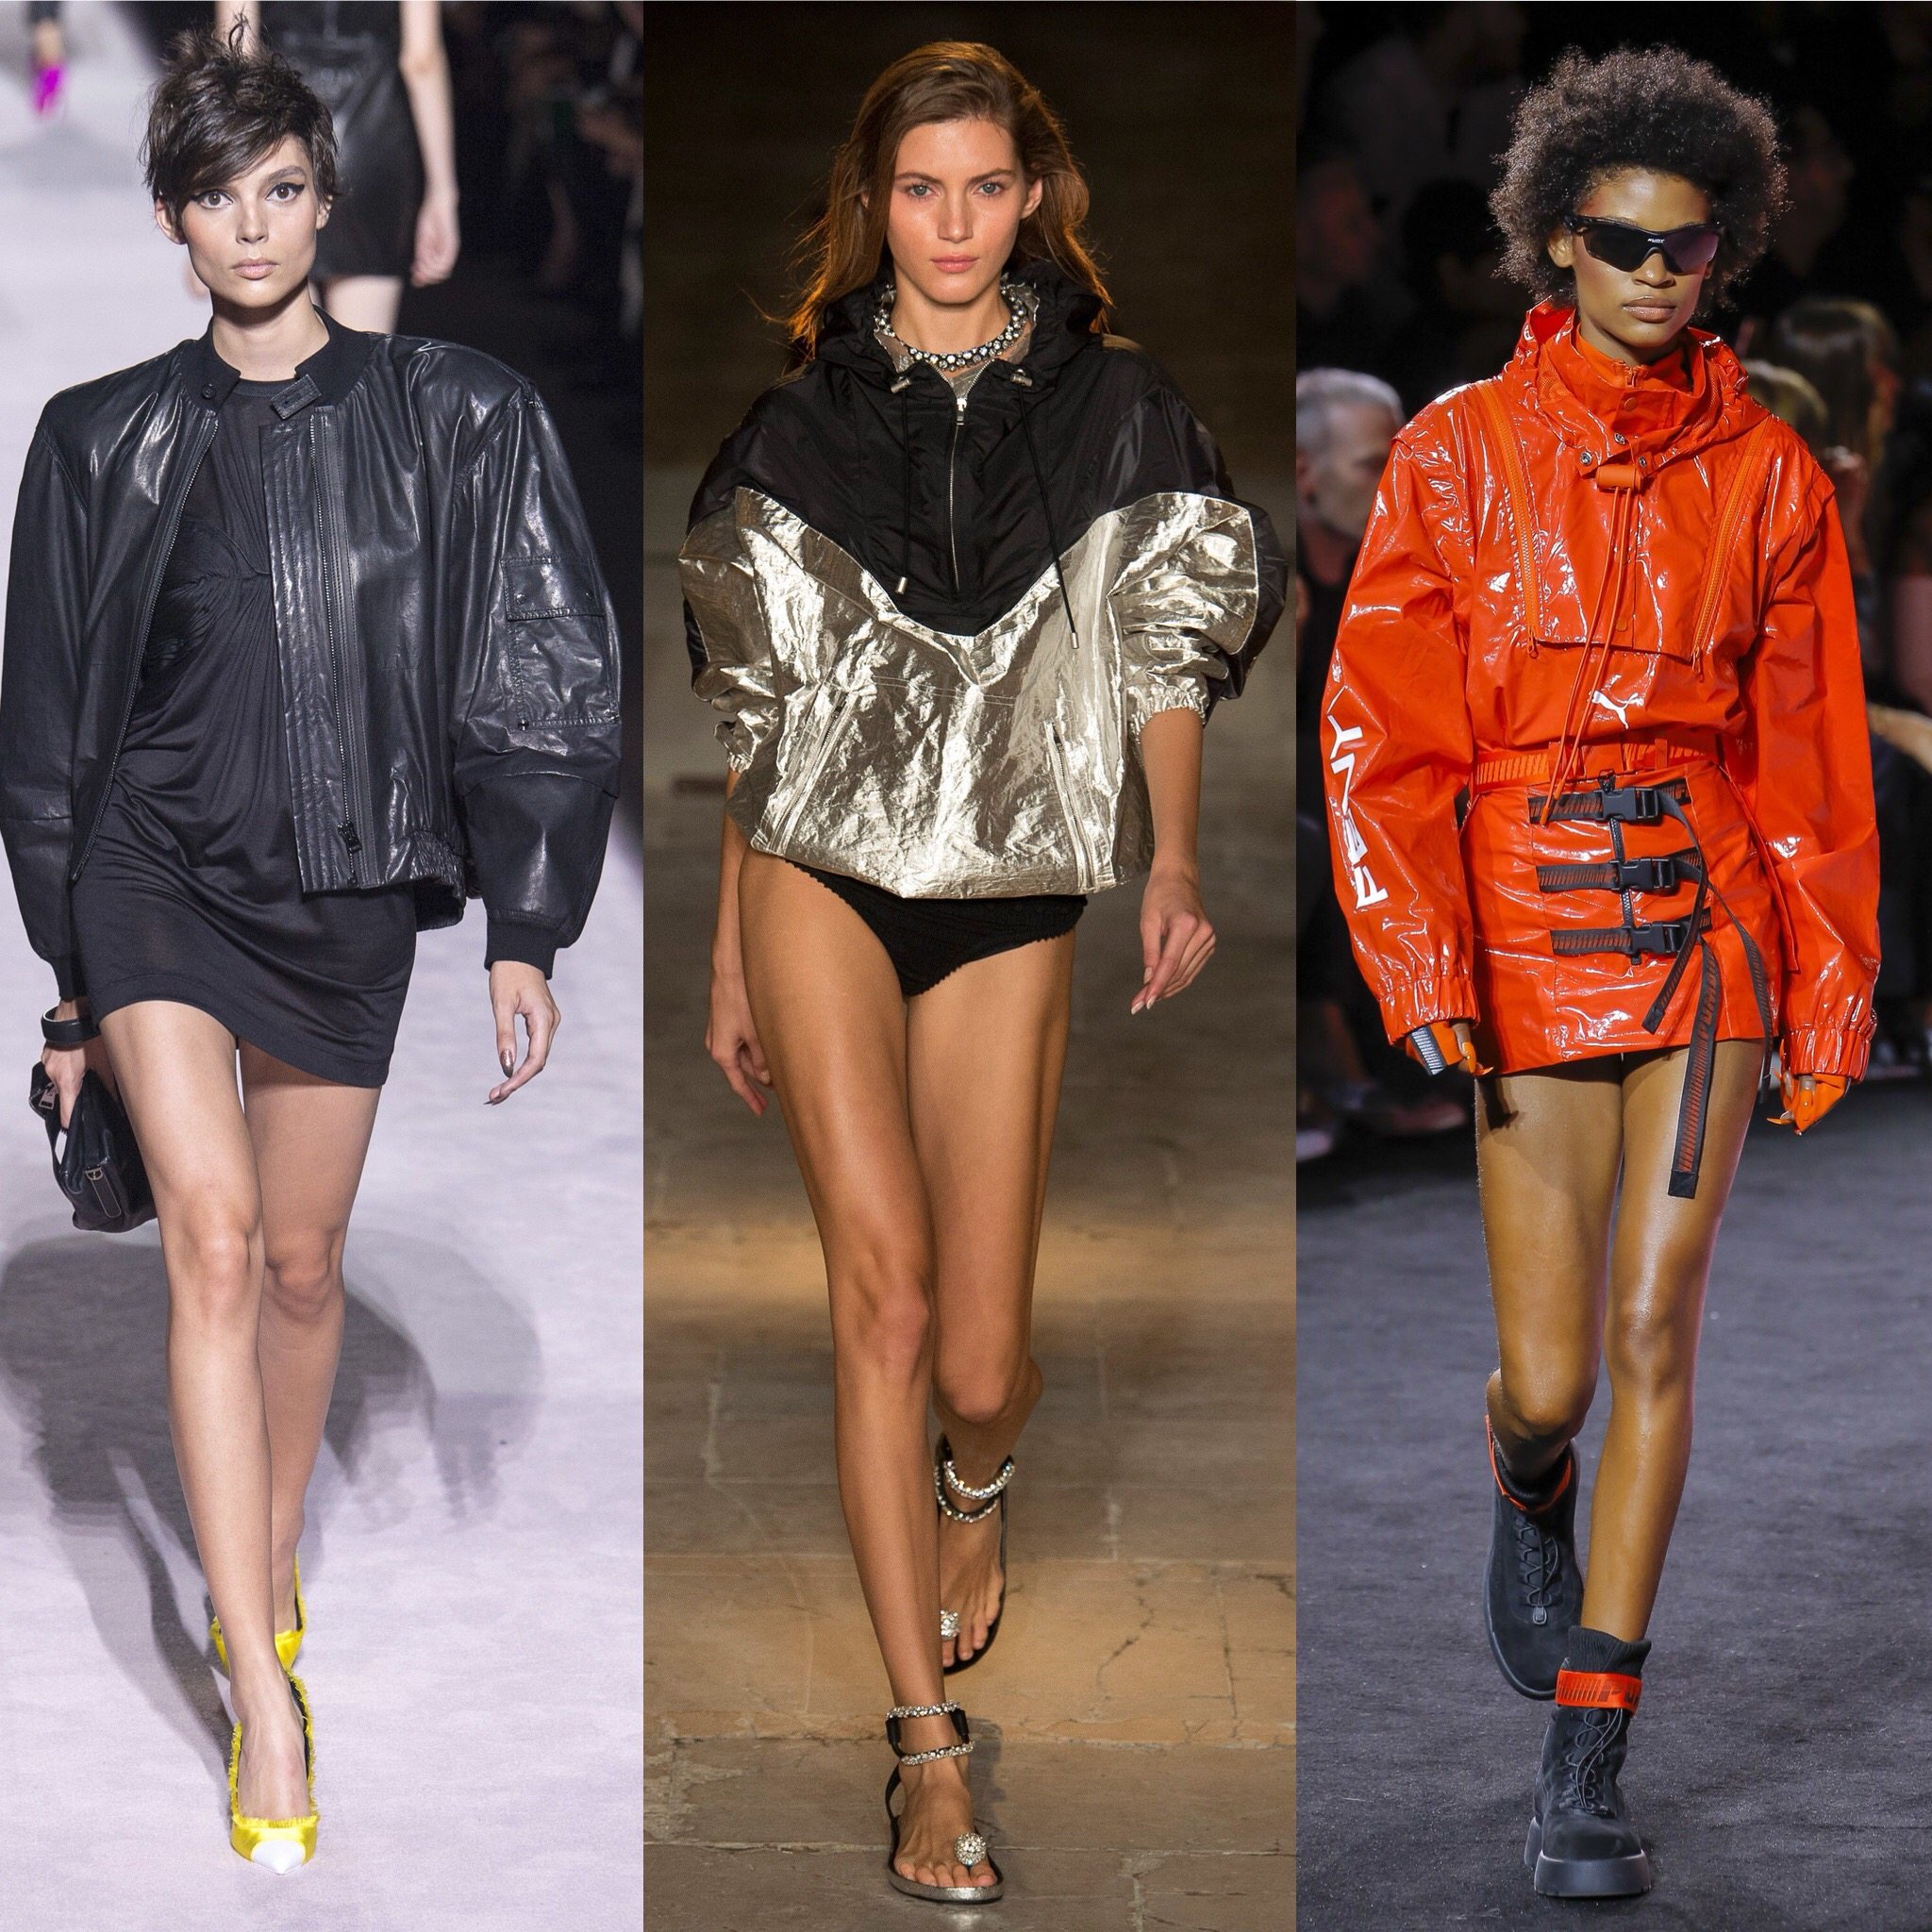 Spring 2018 Trends: Fashion Week coverage - Spring 2018 outwear - Tom Ford - Fenty x Puma - Isabel Marant. More spring 2018 fashion week coverage on Houseofcomil.com. Pictures from Vogue